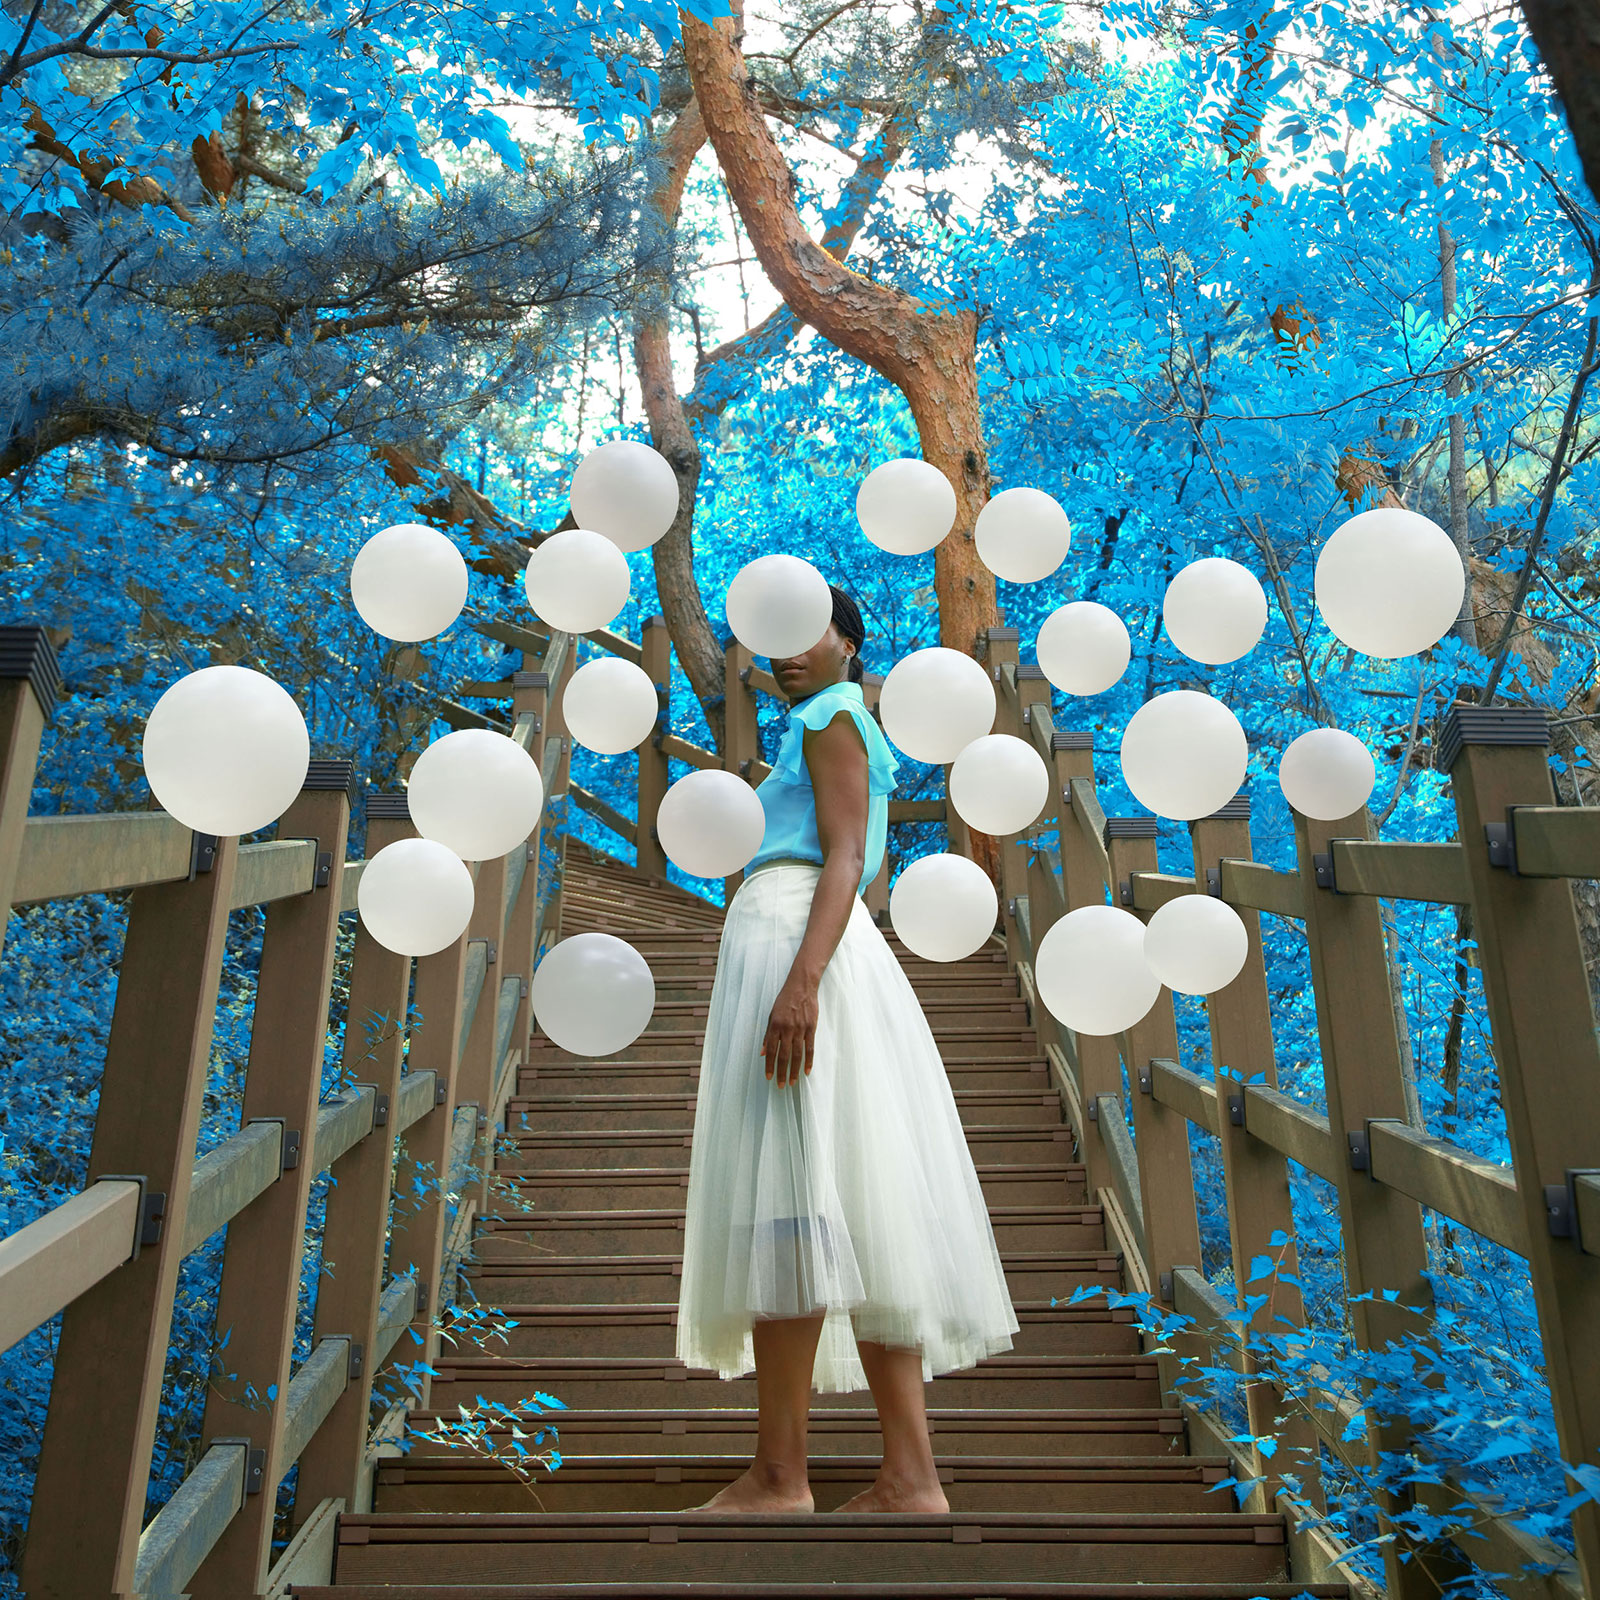 A woman climbs the stairs towards a bright blue forest with balloons covering her face